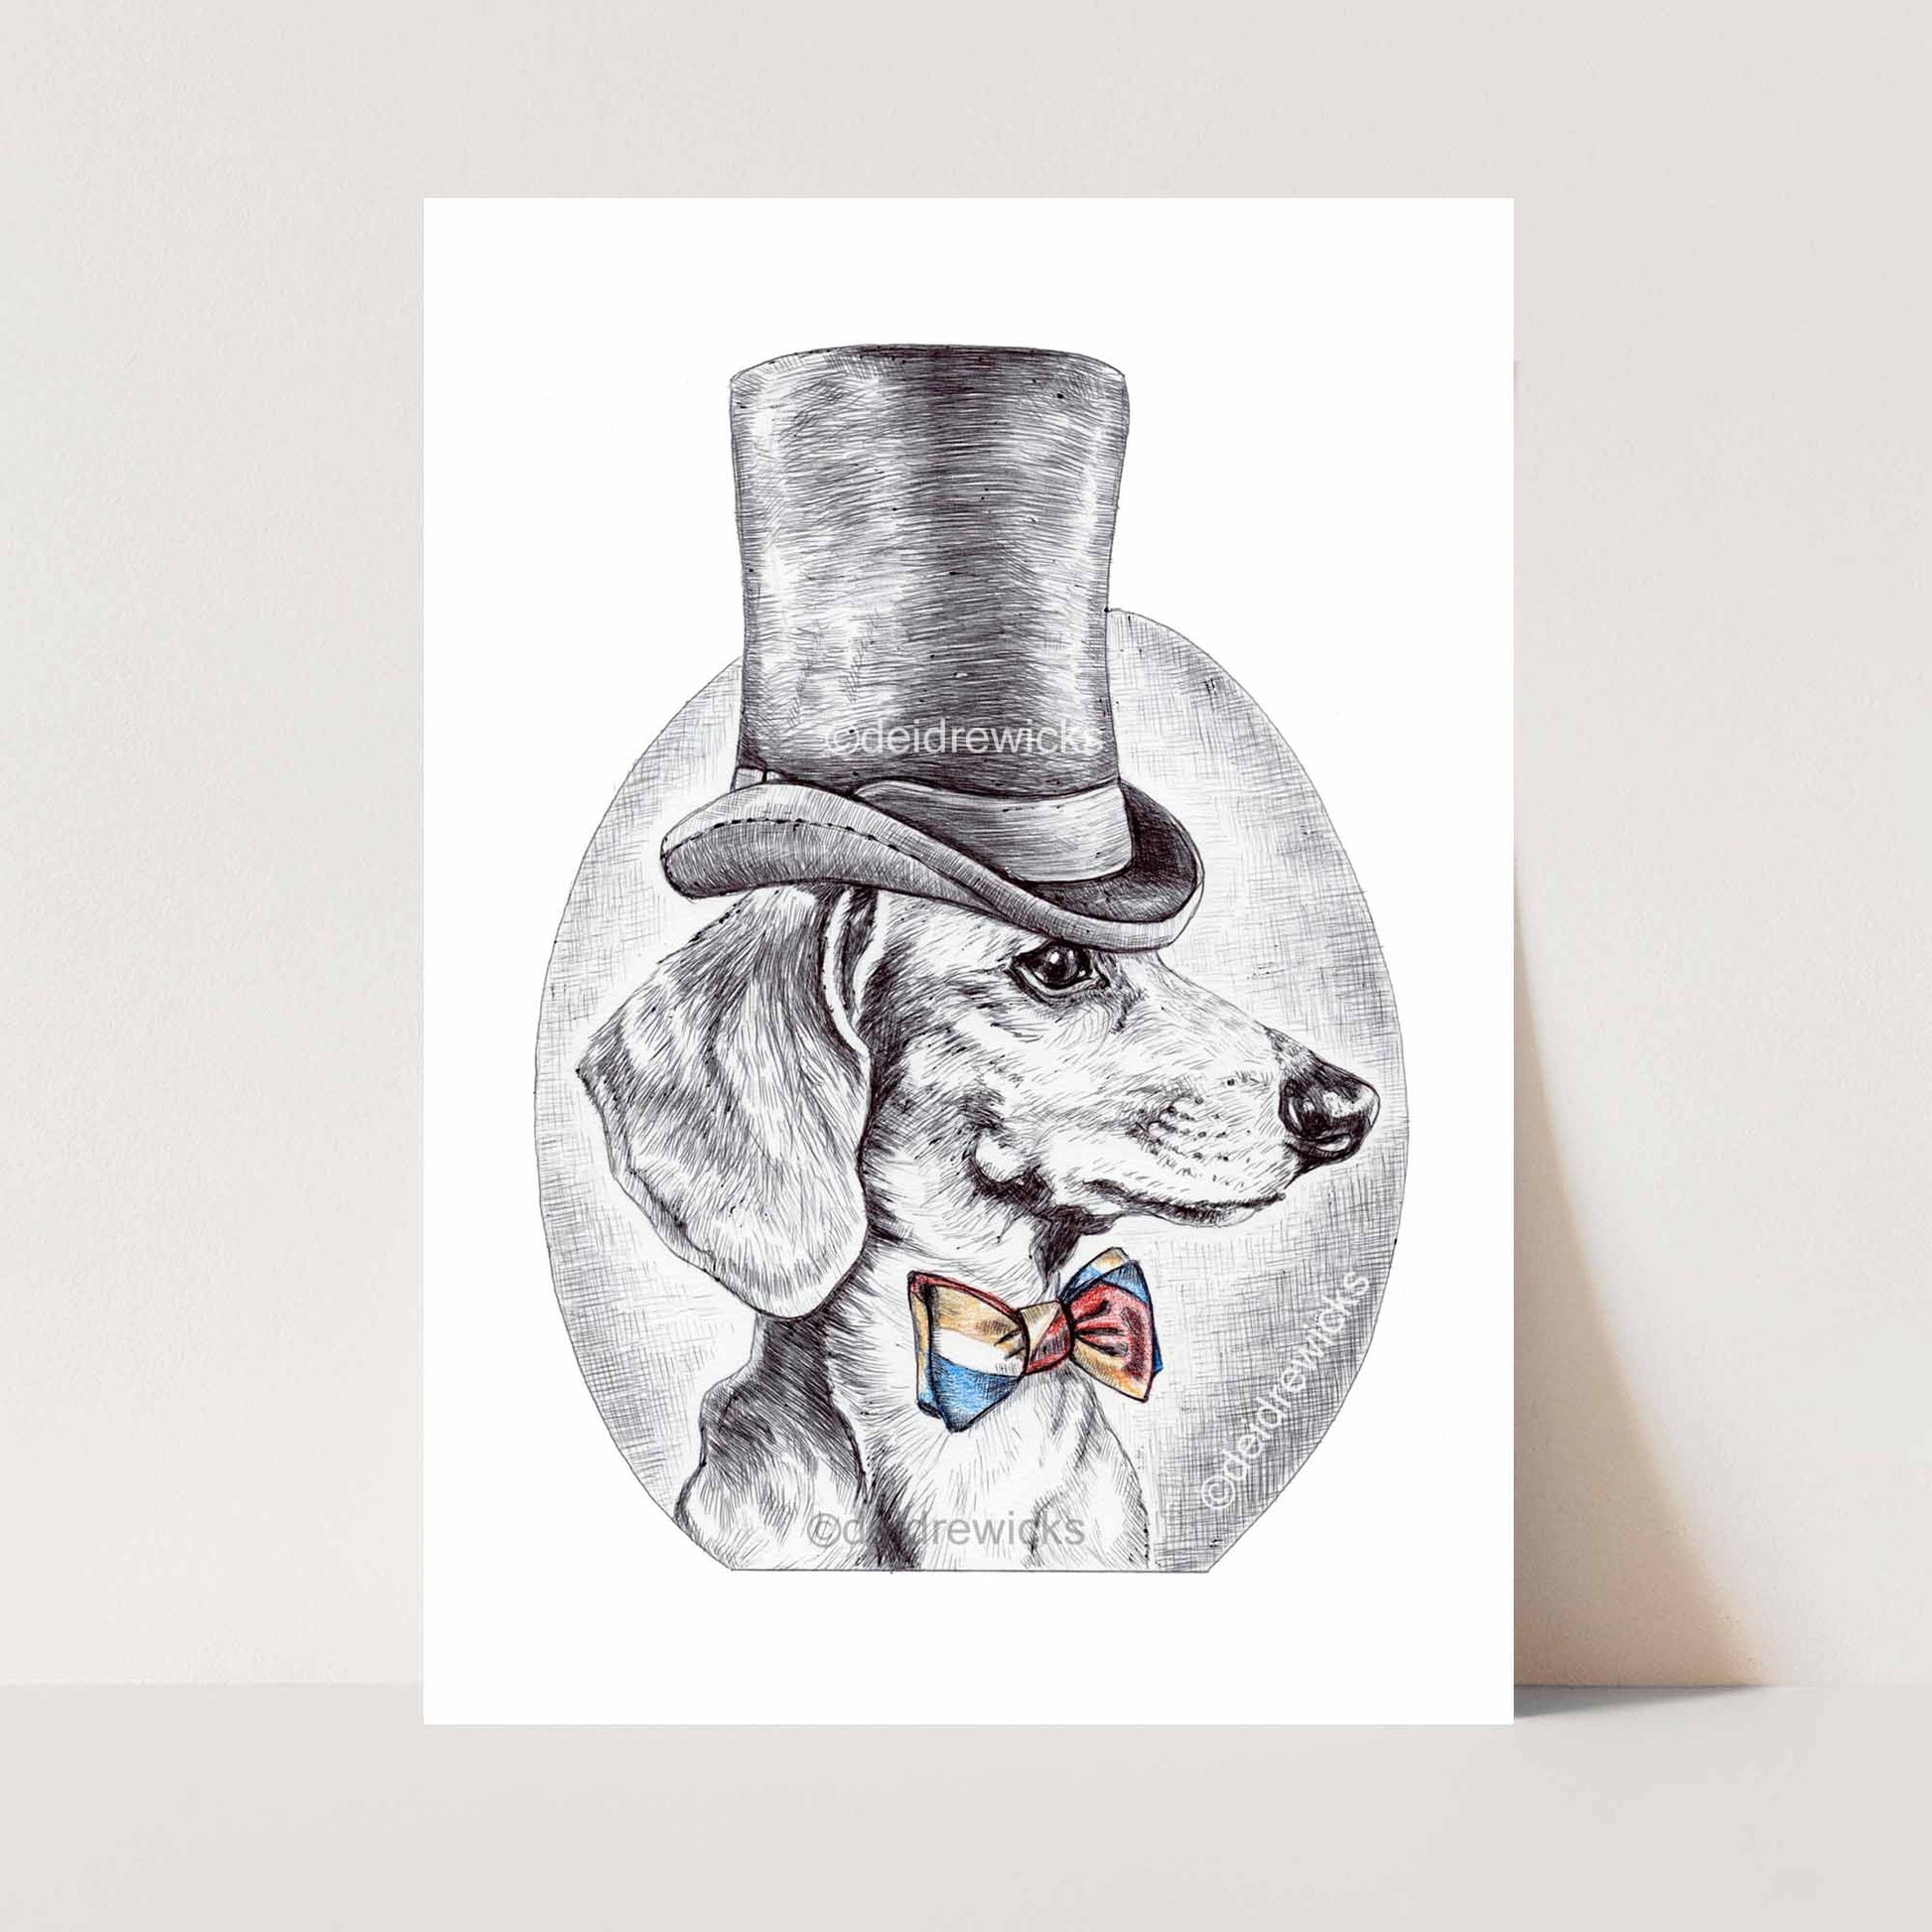 Ballpoint pen ink drawing of a dachshund dog wearing a top hat and bow tie. He's classy like that. By Deidre Wicks